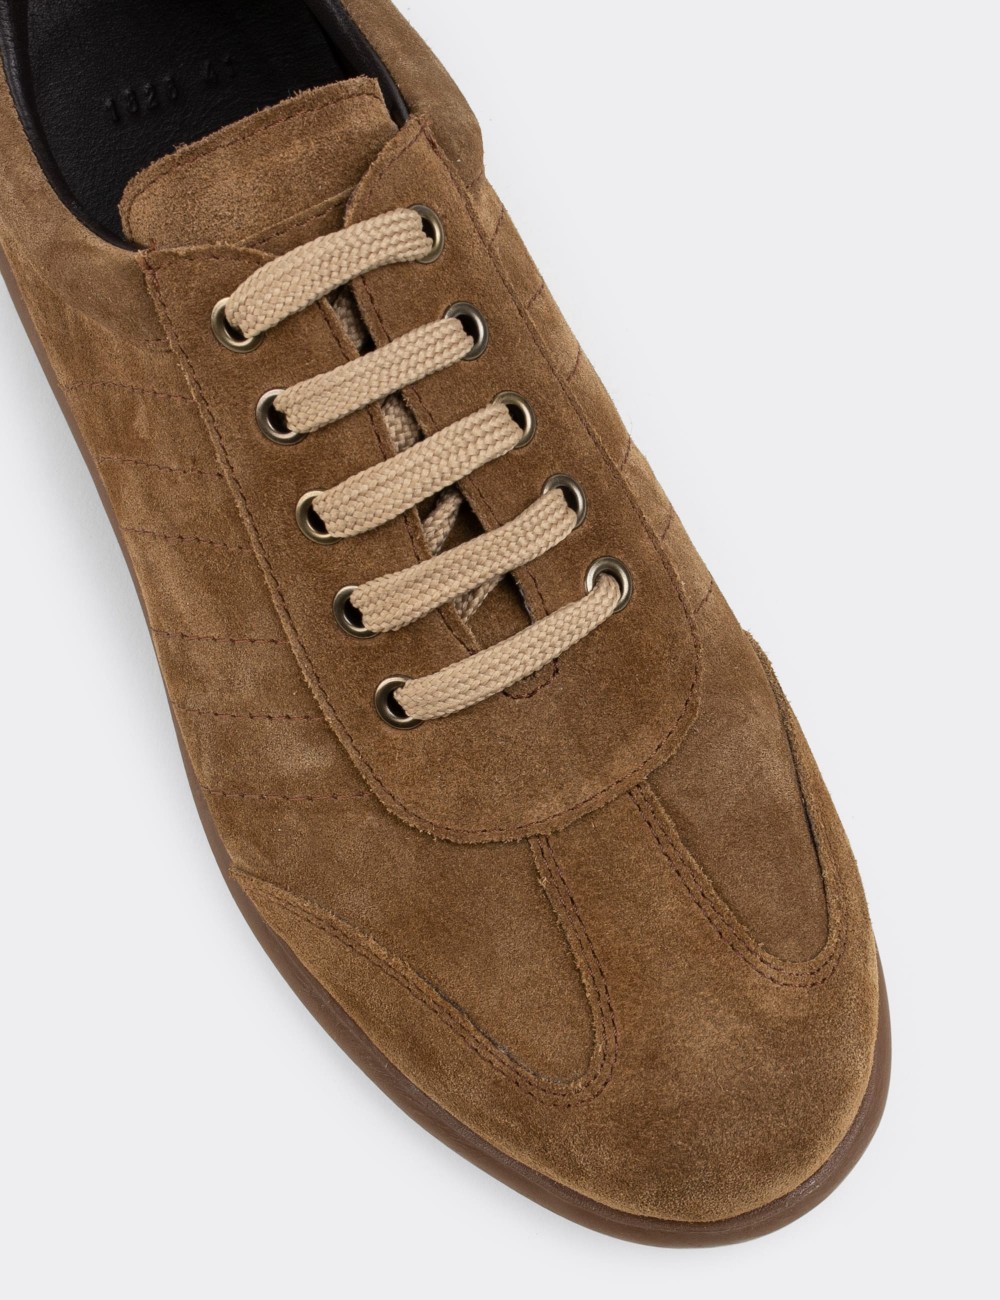 Tan Suede Leather Lace-up Shoes - 01826MTBAC04